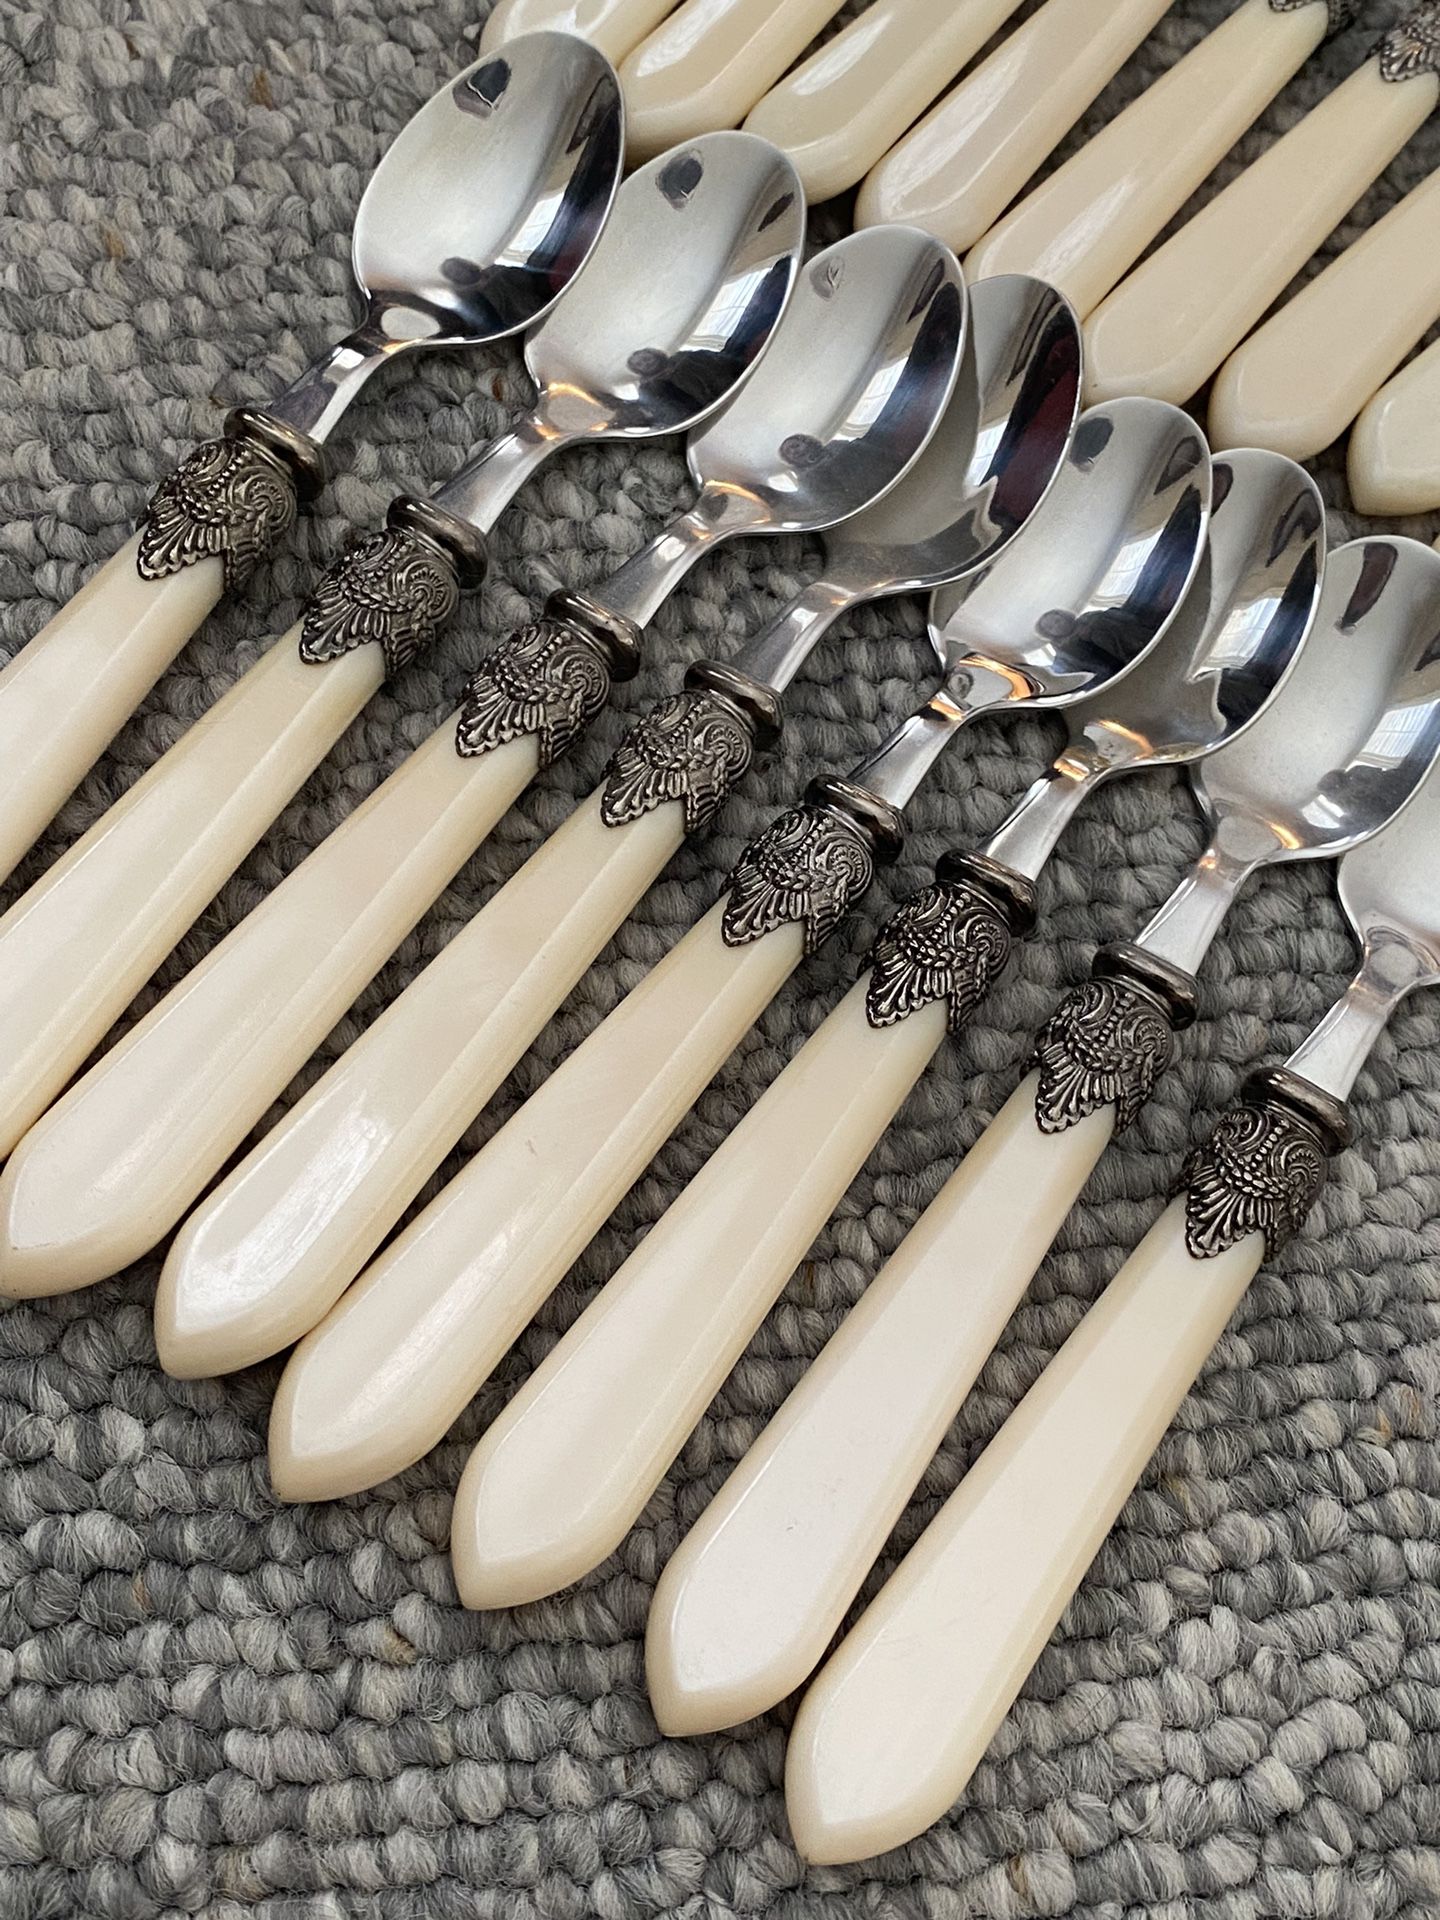 Vintage Faux Ivory Stainless Silverware